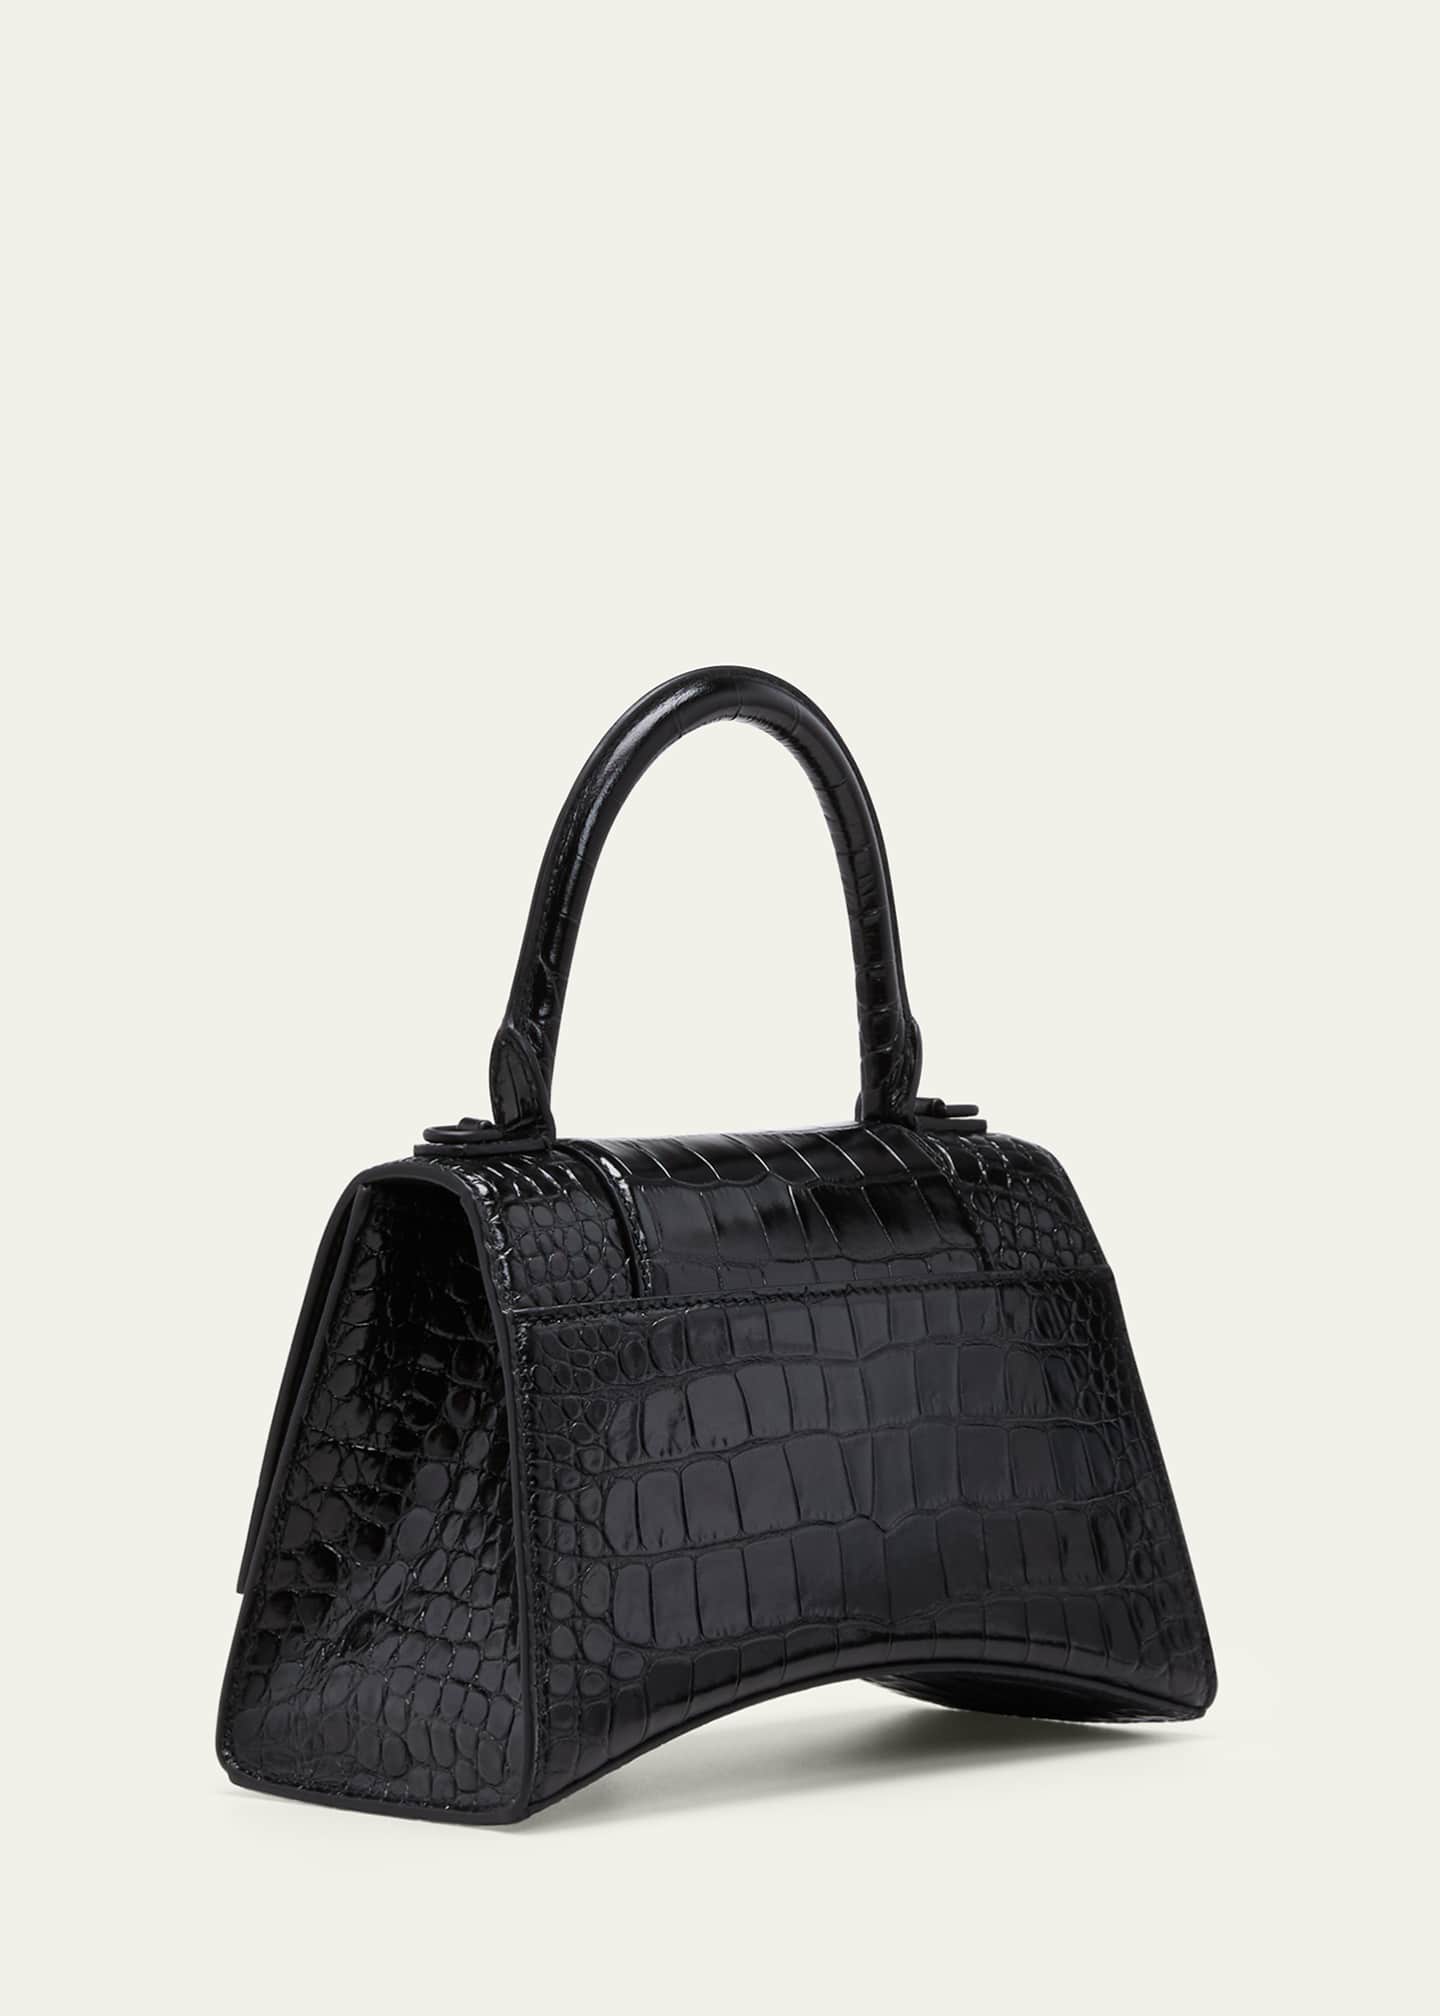 Luxury bag - Small Hourglass Graphity navy blue bag in crocodile